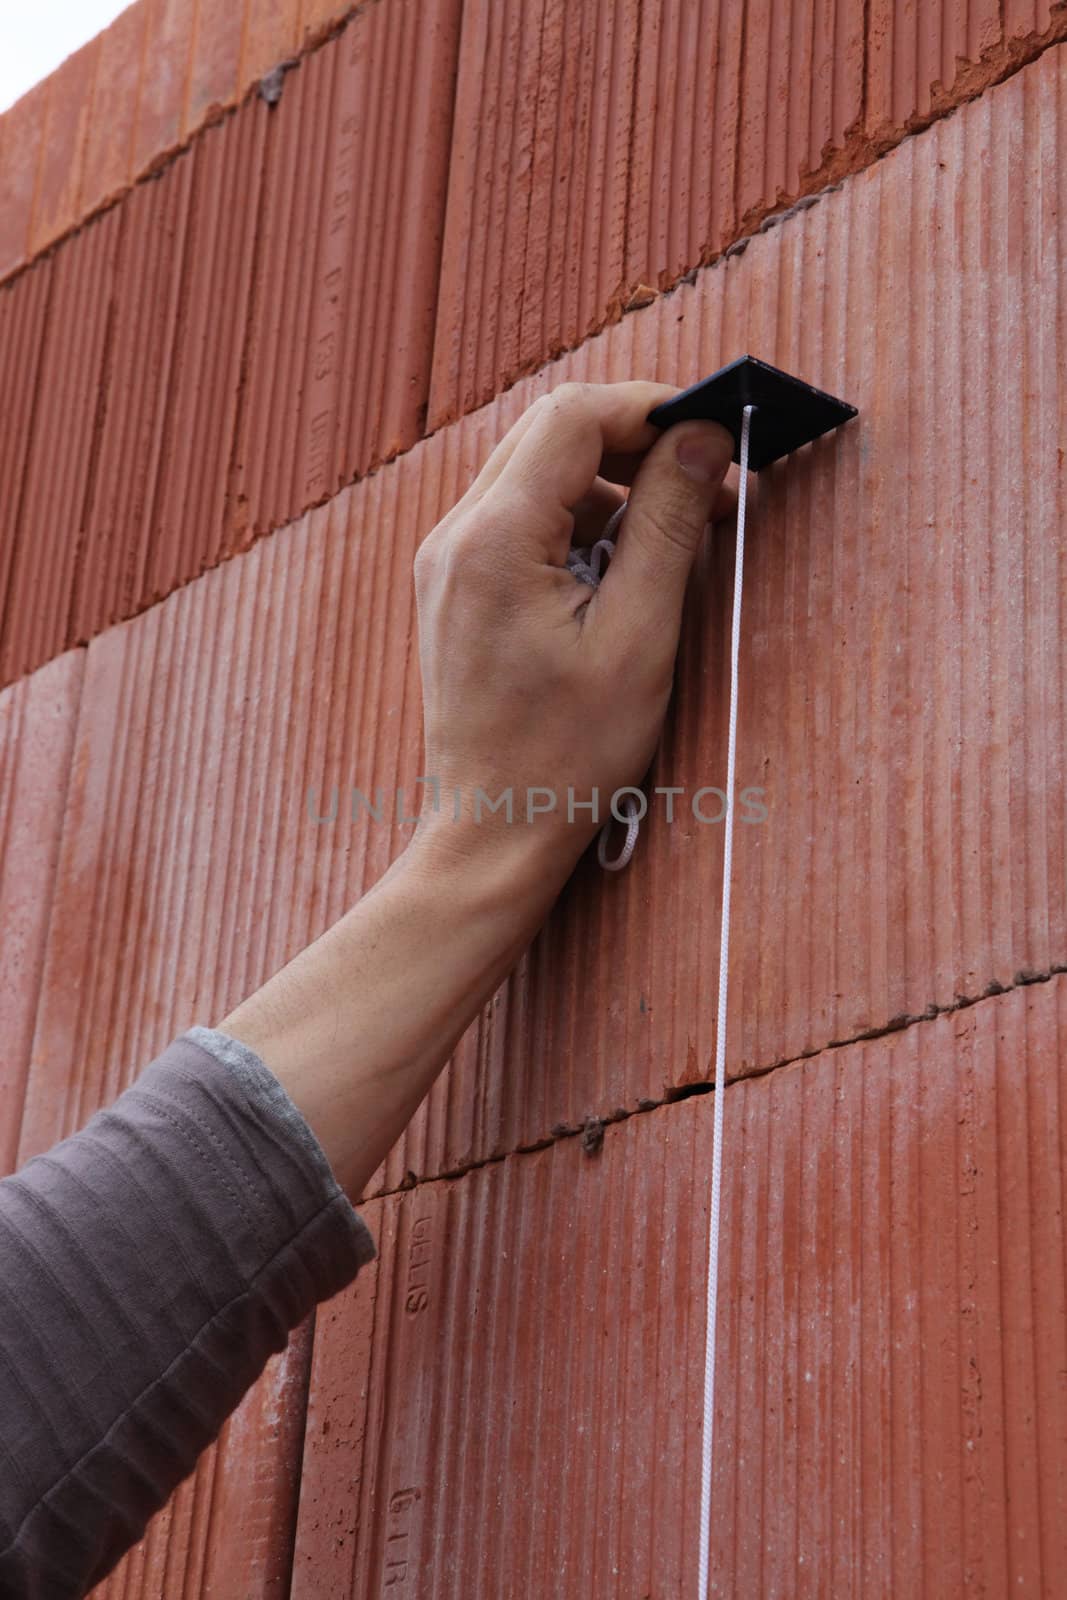 Mason checking wall is straight by phovoir